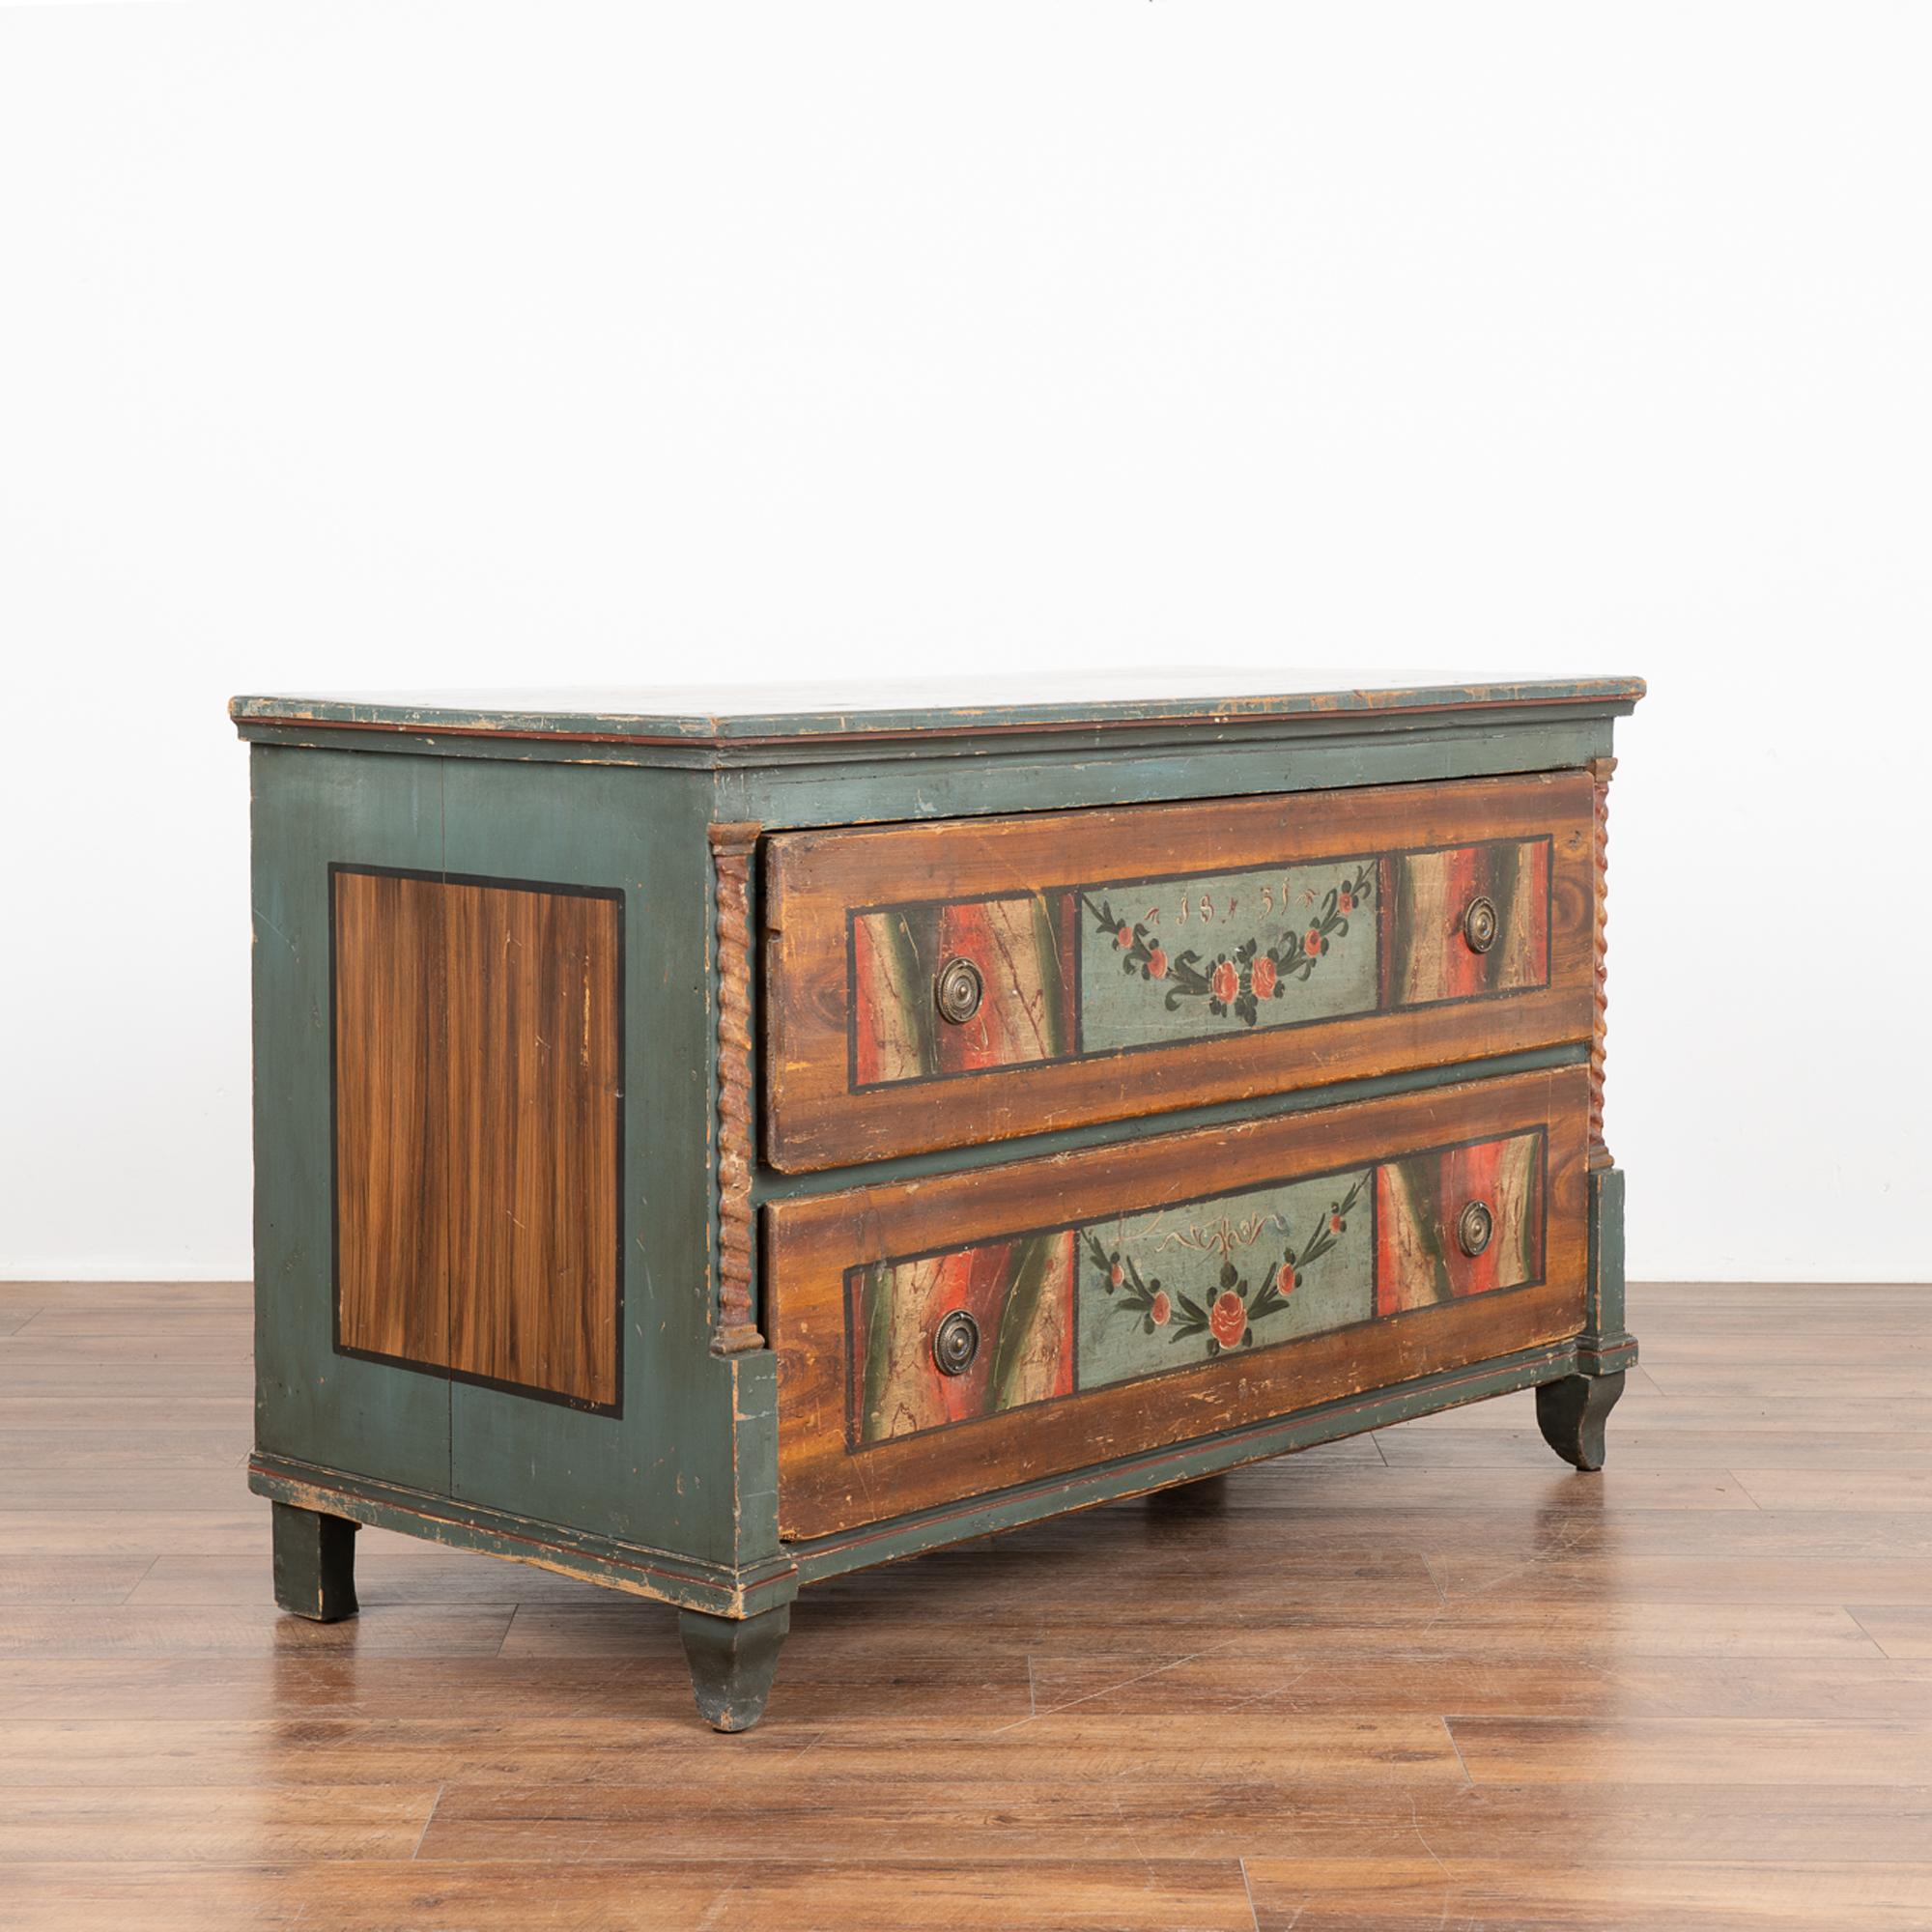 The vibrant colors are all original on this large painted chest of two drawers or 